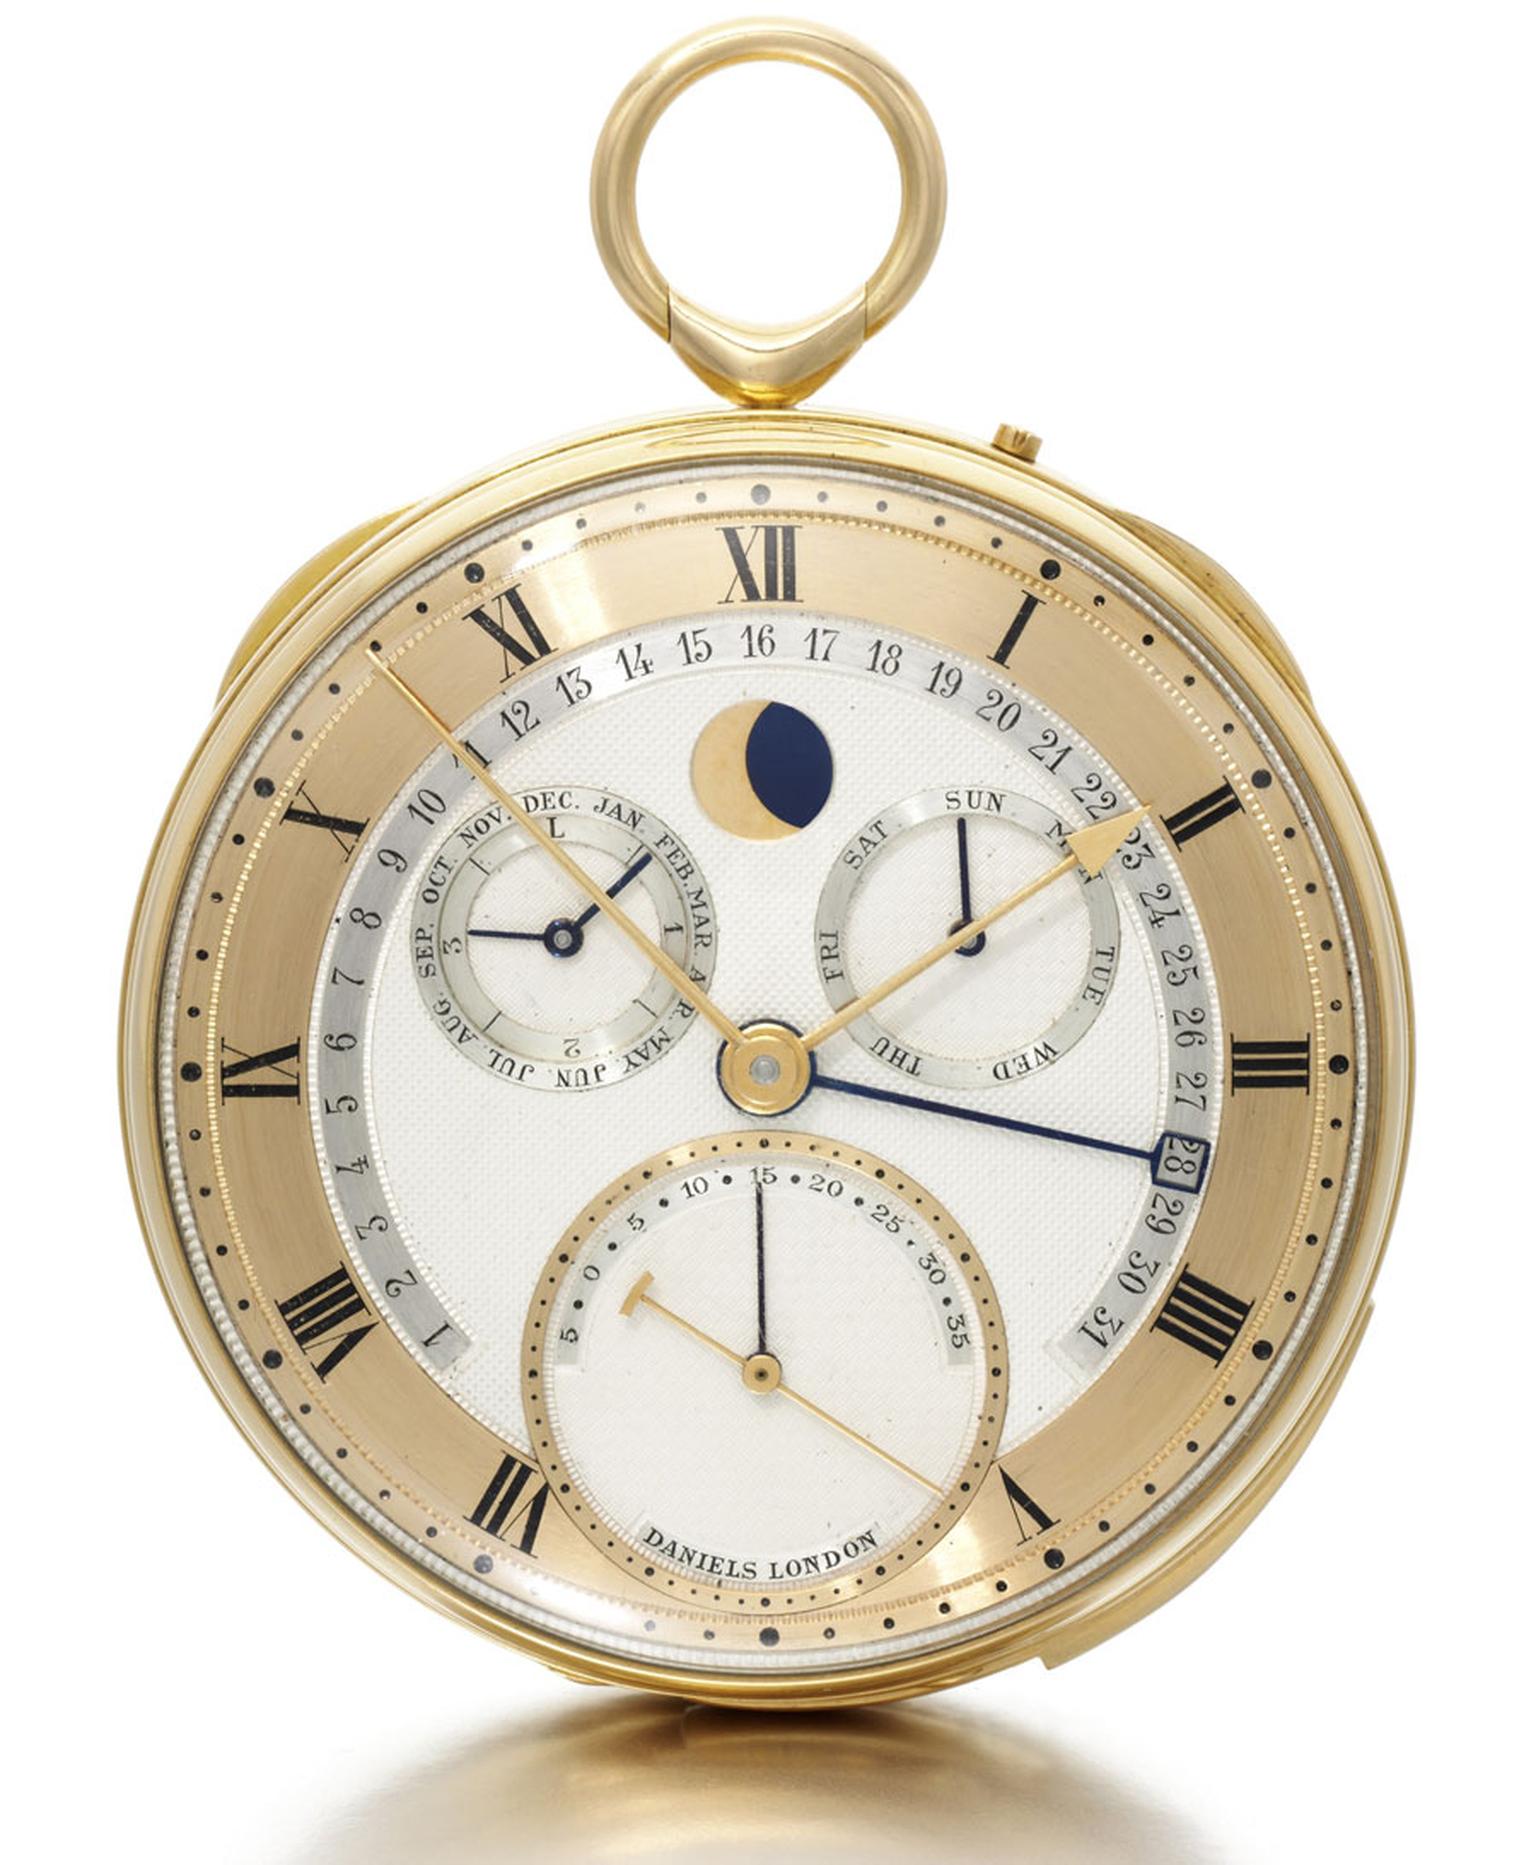 George Daniels 18K YELLOW GOLD ONE-MINUTE TOURBILLON WITH DANIELS SLIM CO-AXIAL ESCAPEMENT